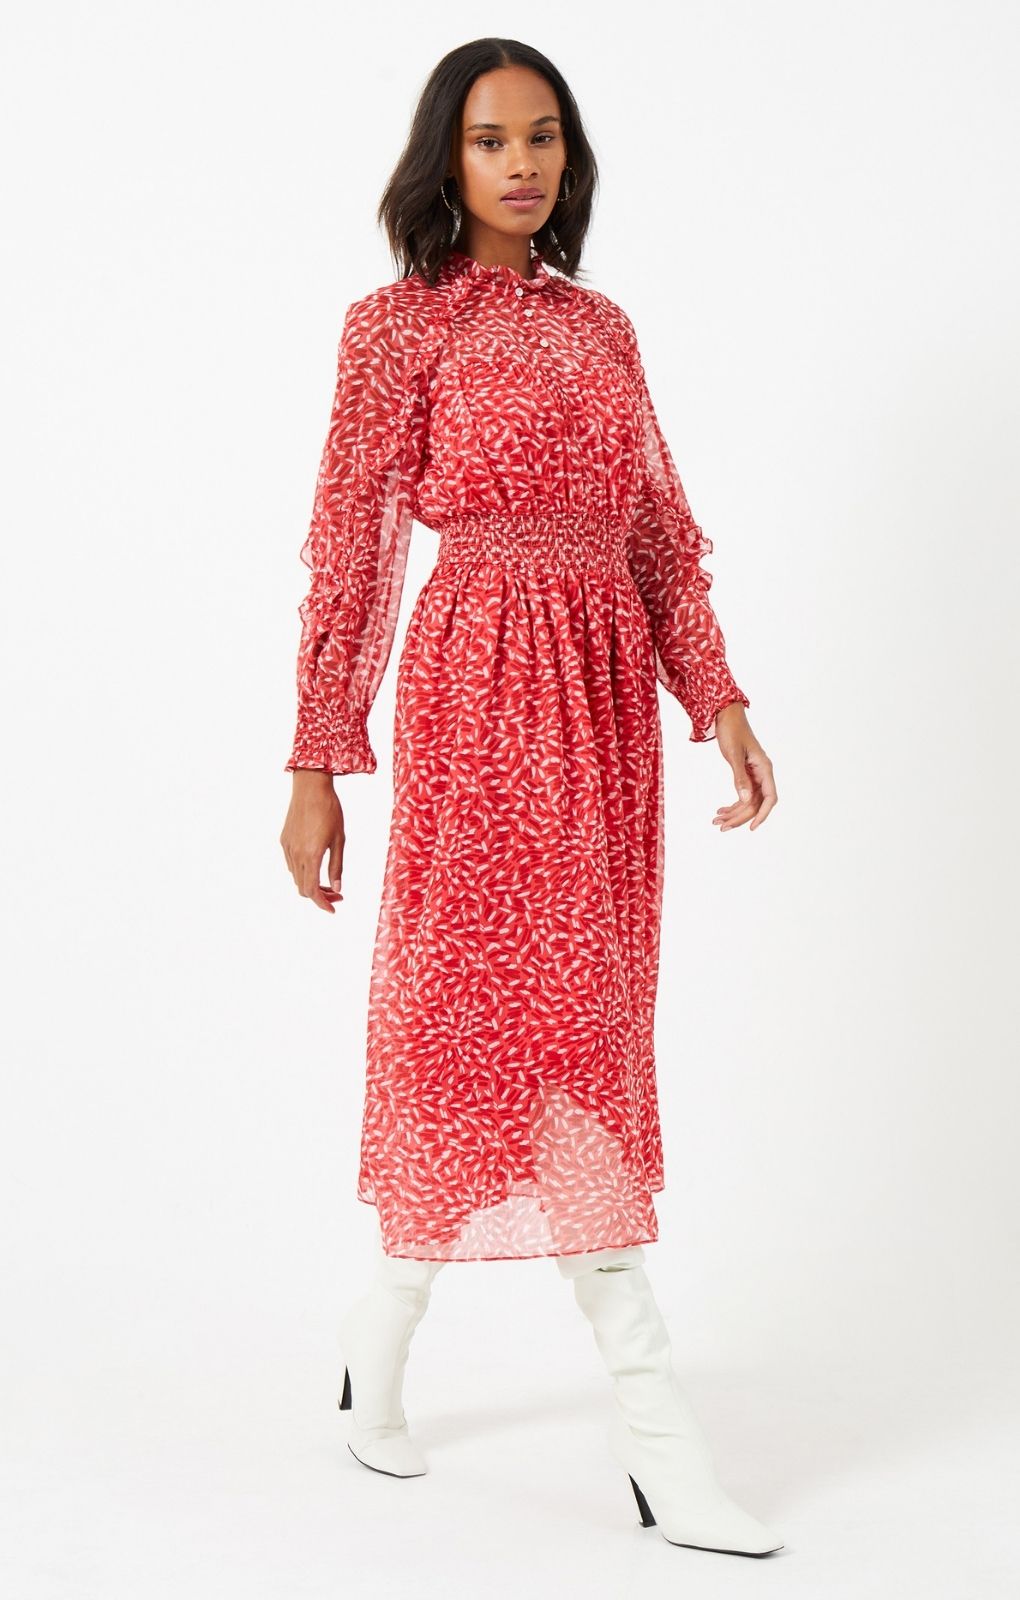 French Connection Hallie Midi Dress in Bittersweet product image